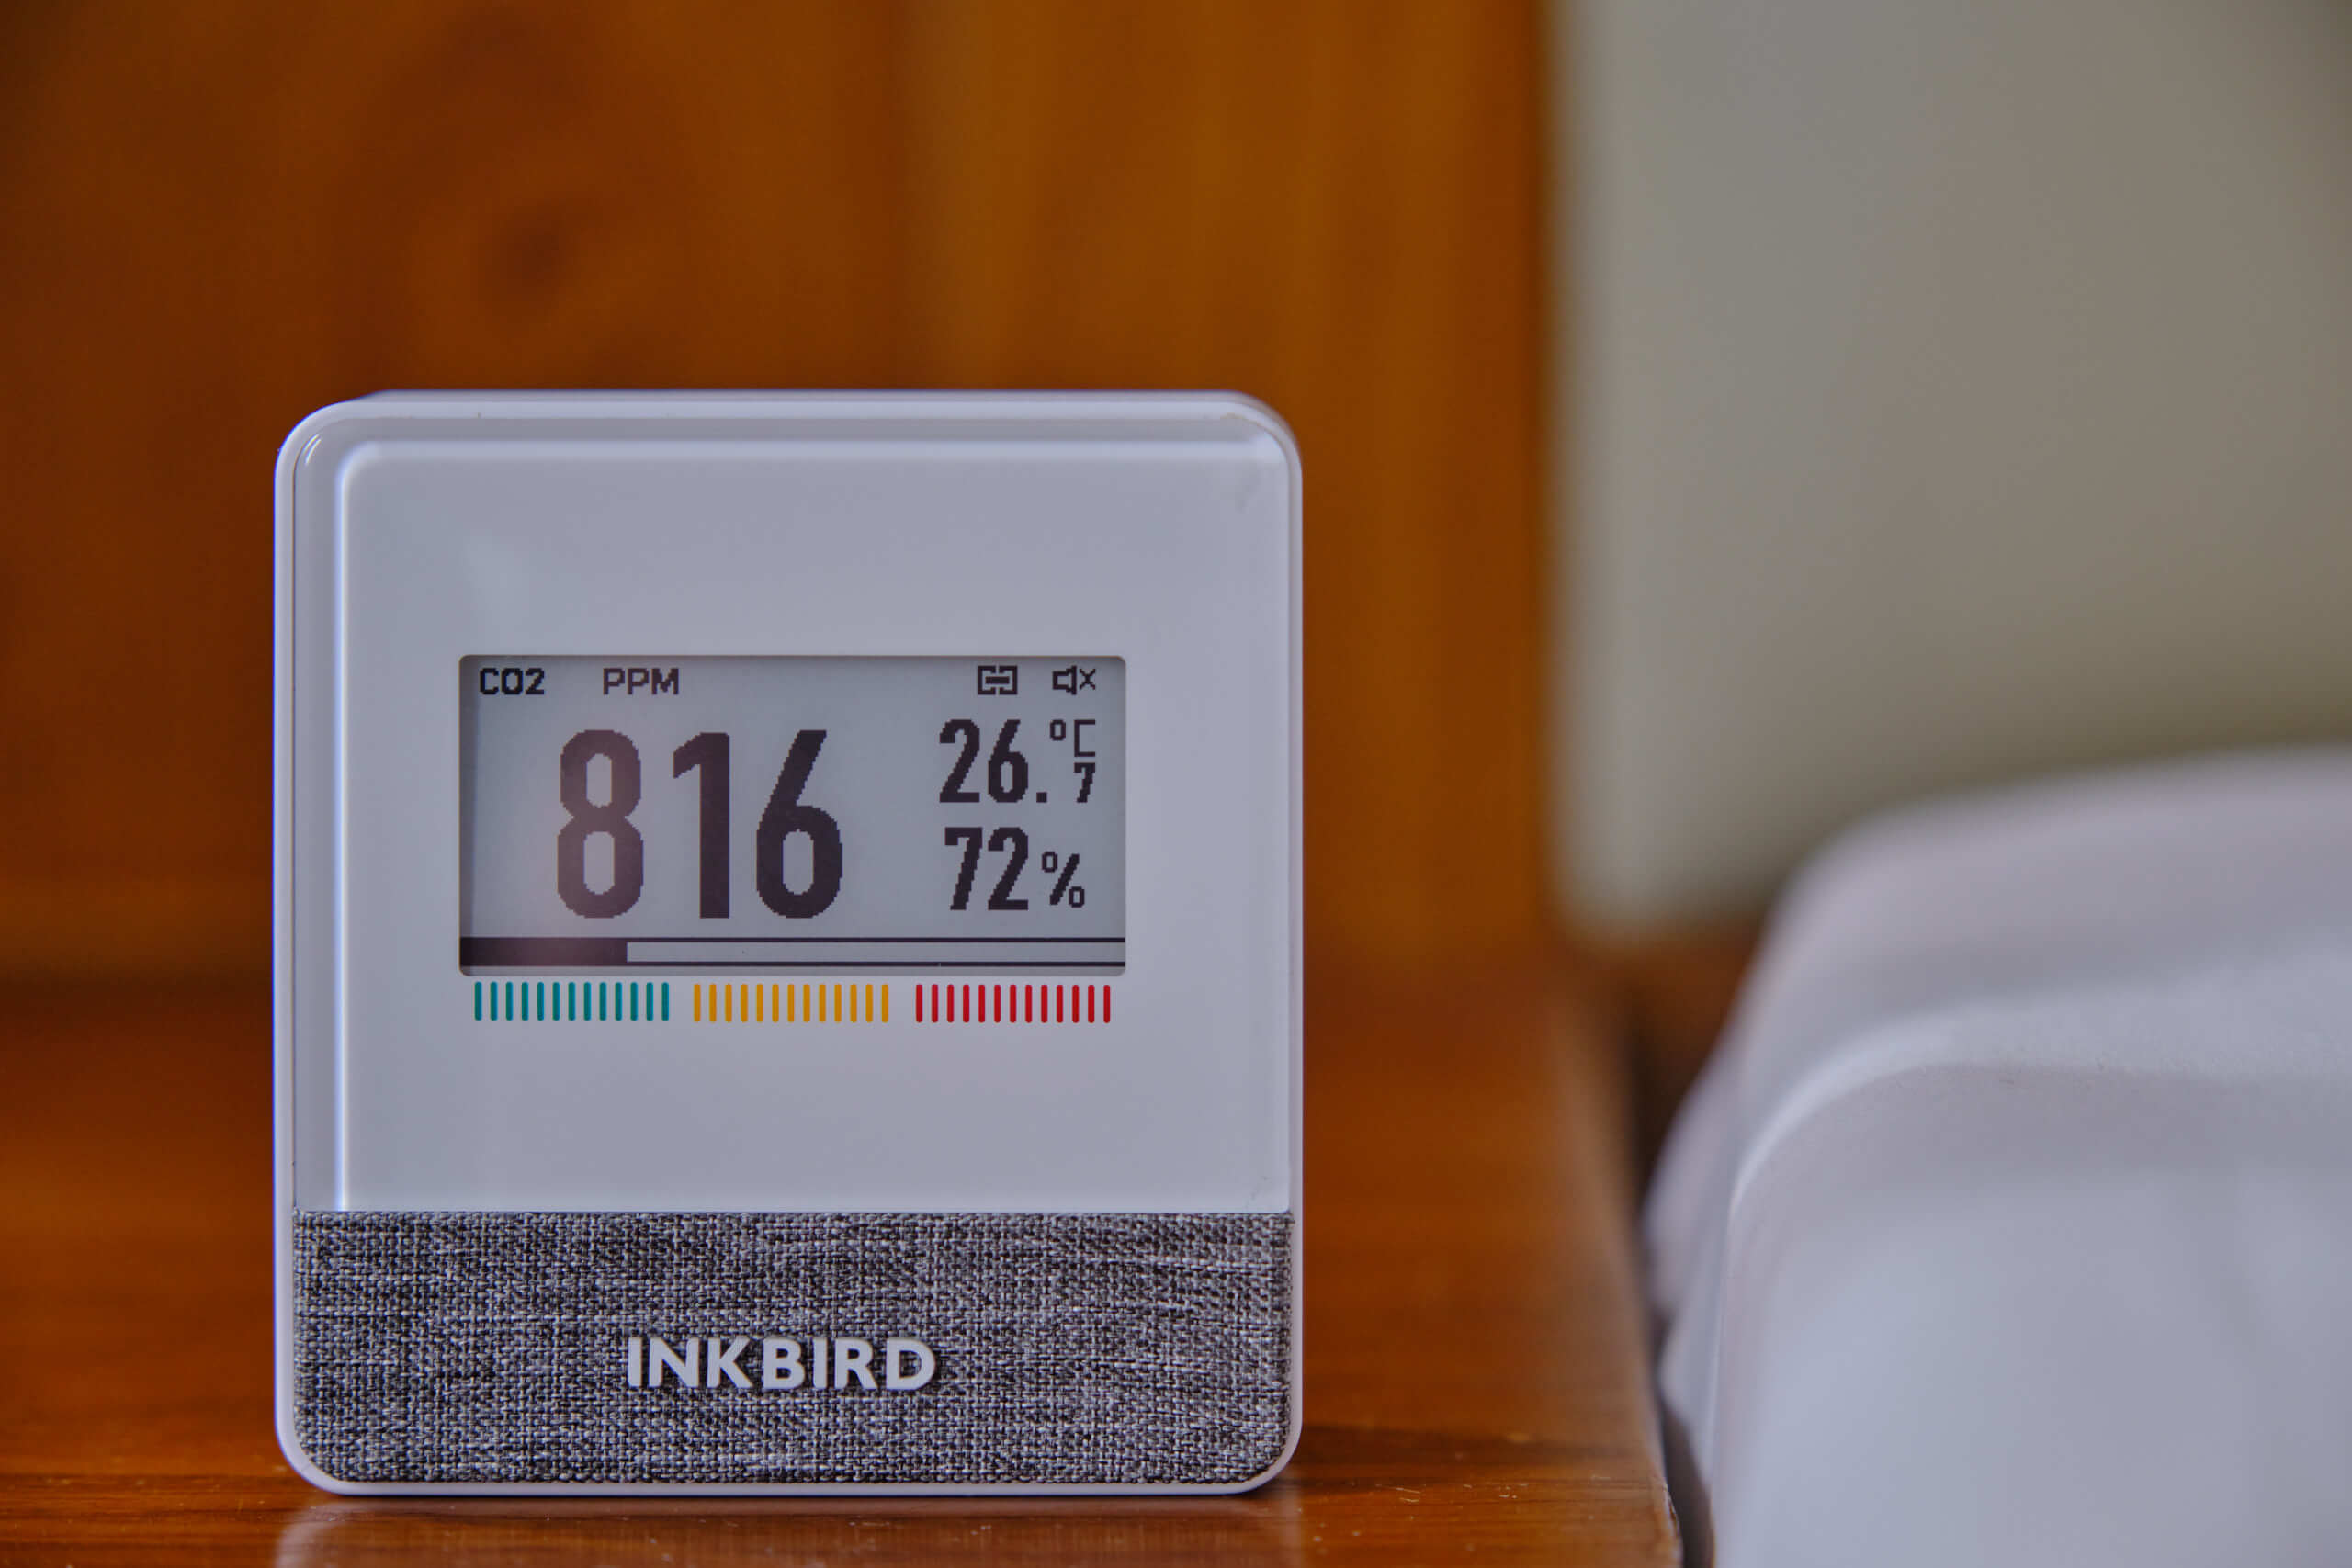 INKBIRD IAM-T1 Carbon Dioxide Monitor Review - Better Than the